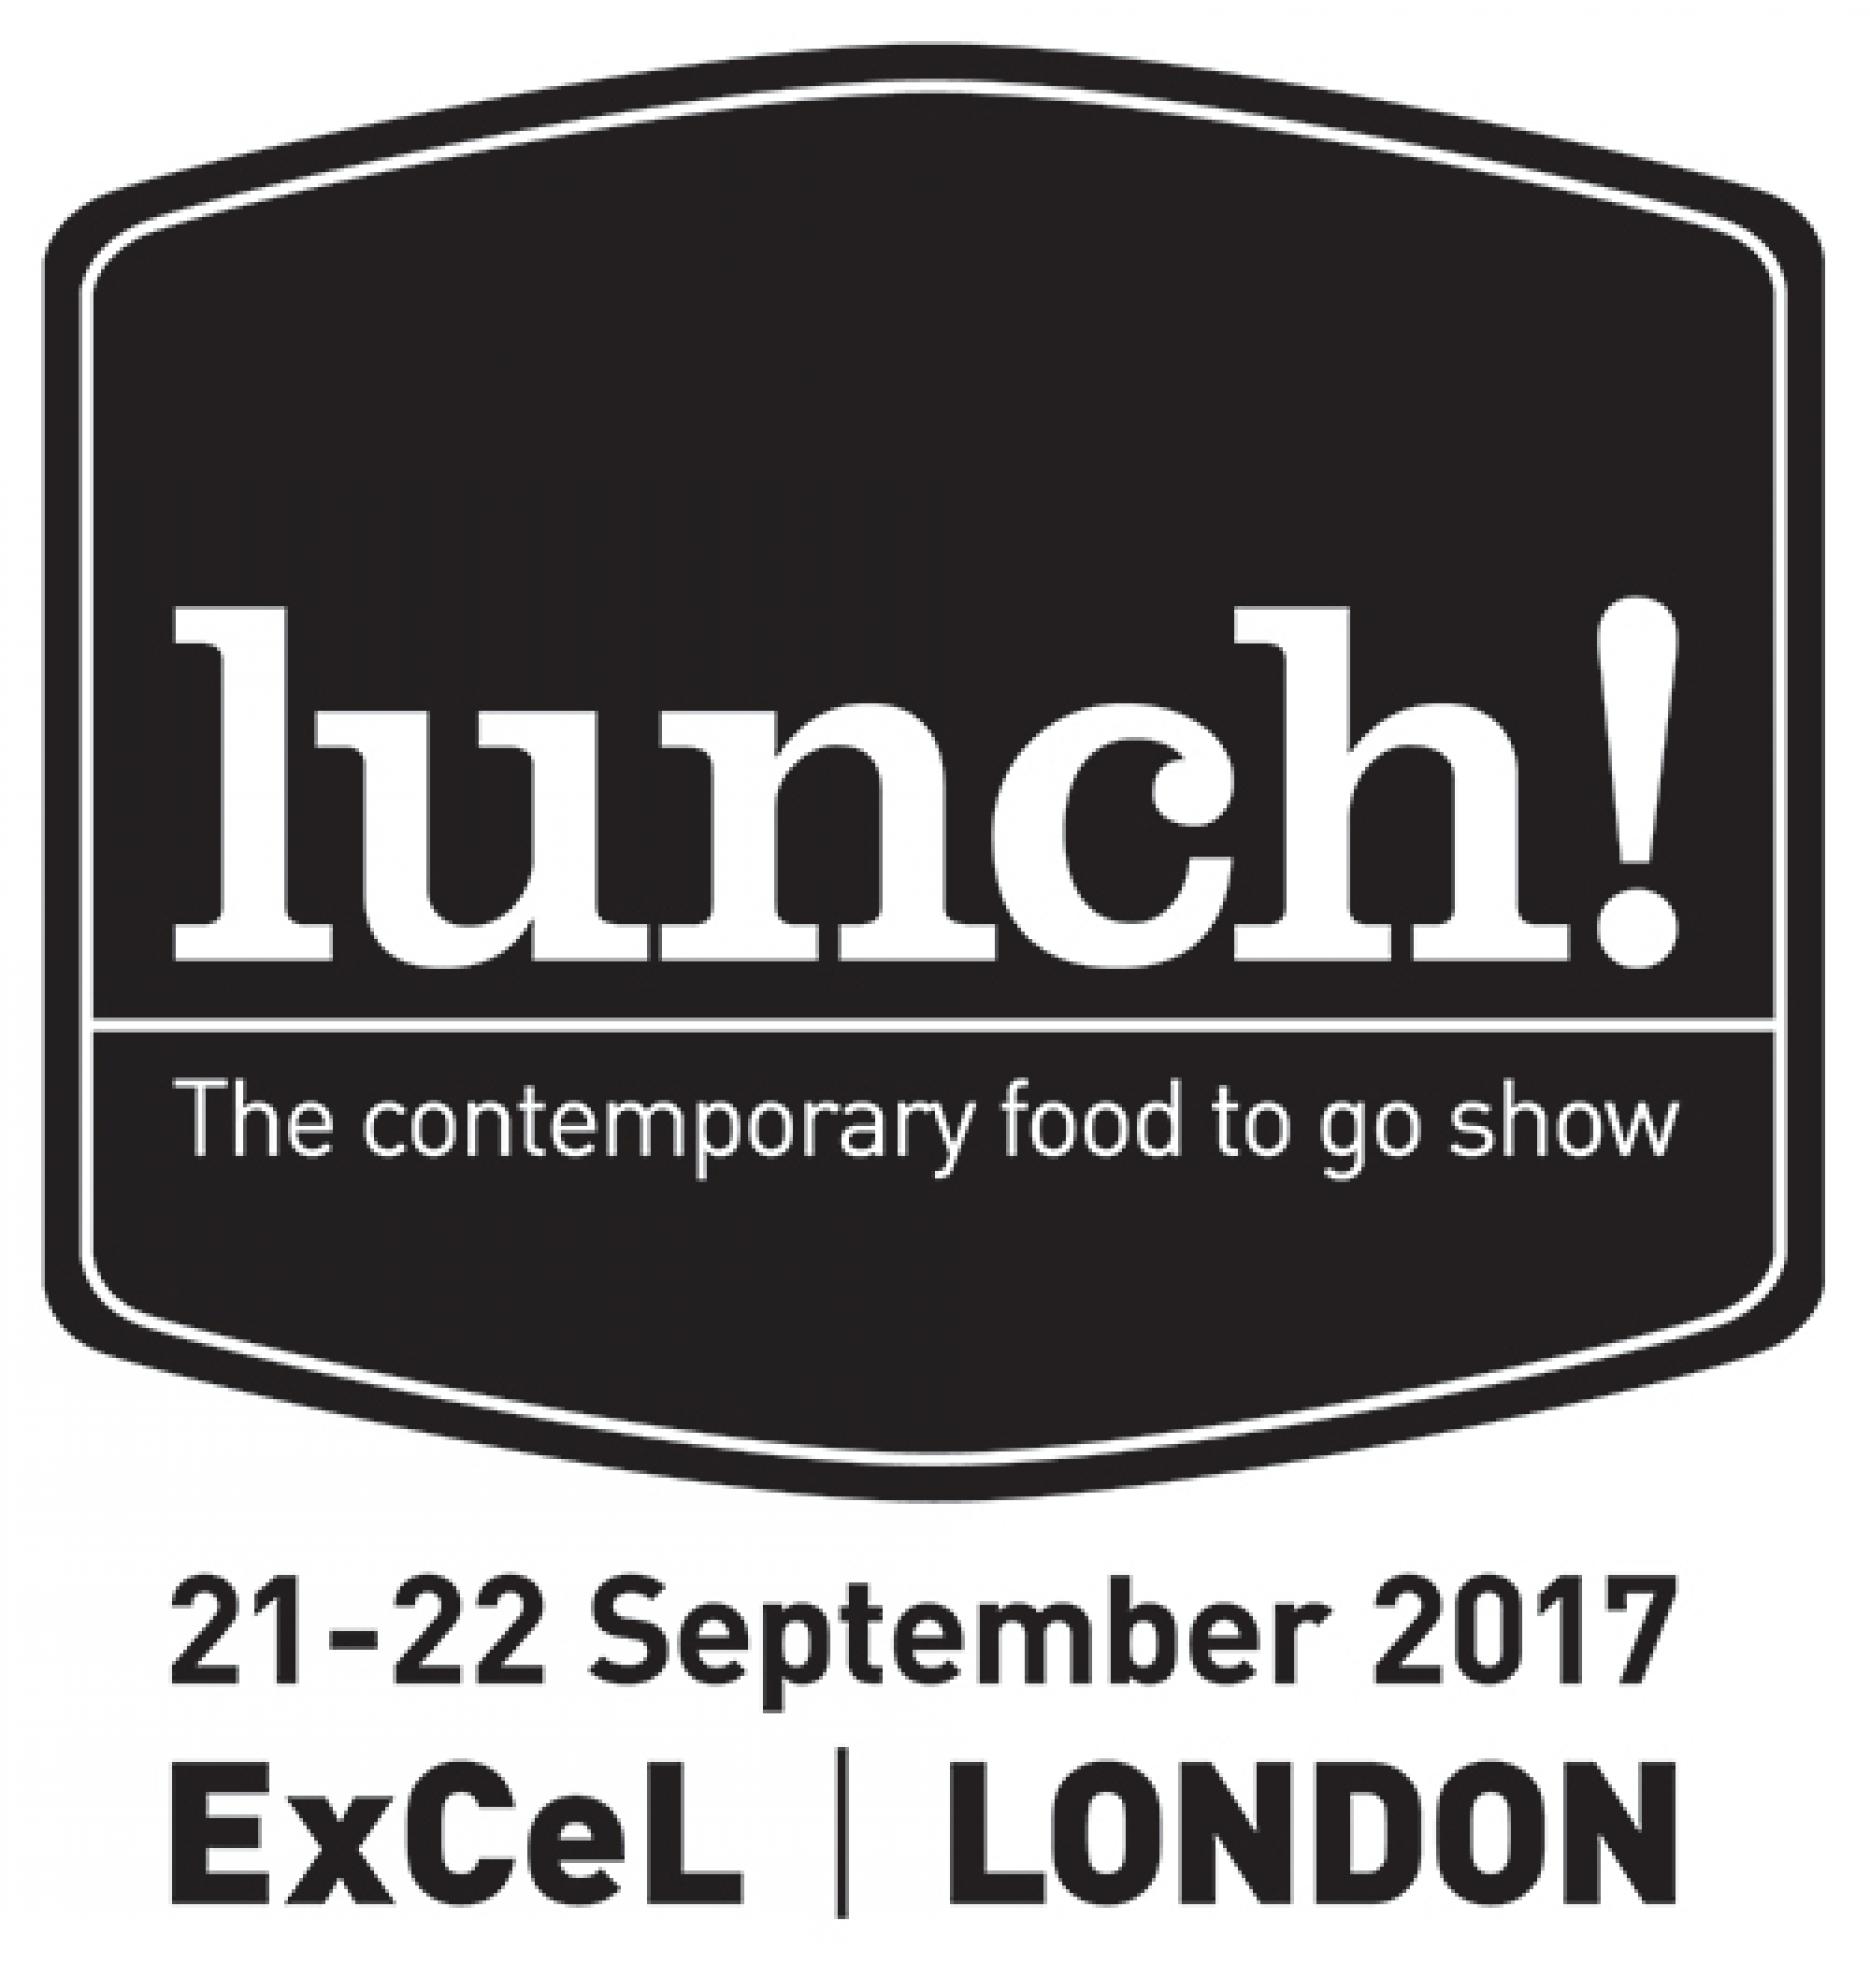 CEOs of Greggs and EAT join lunch!’s 10th anniversary line-up